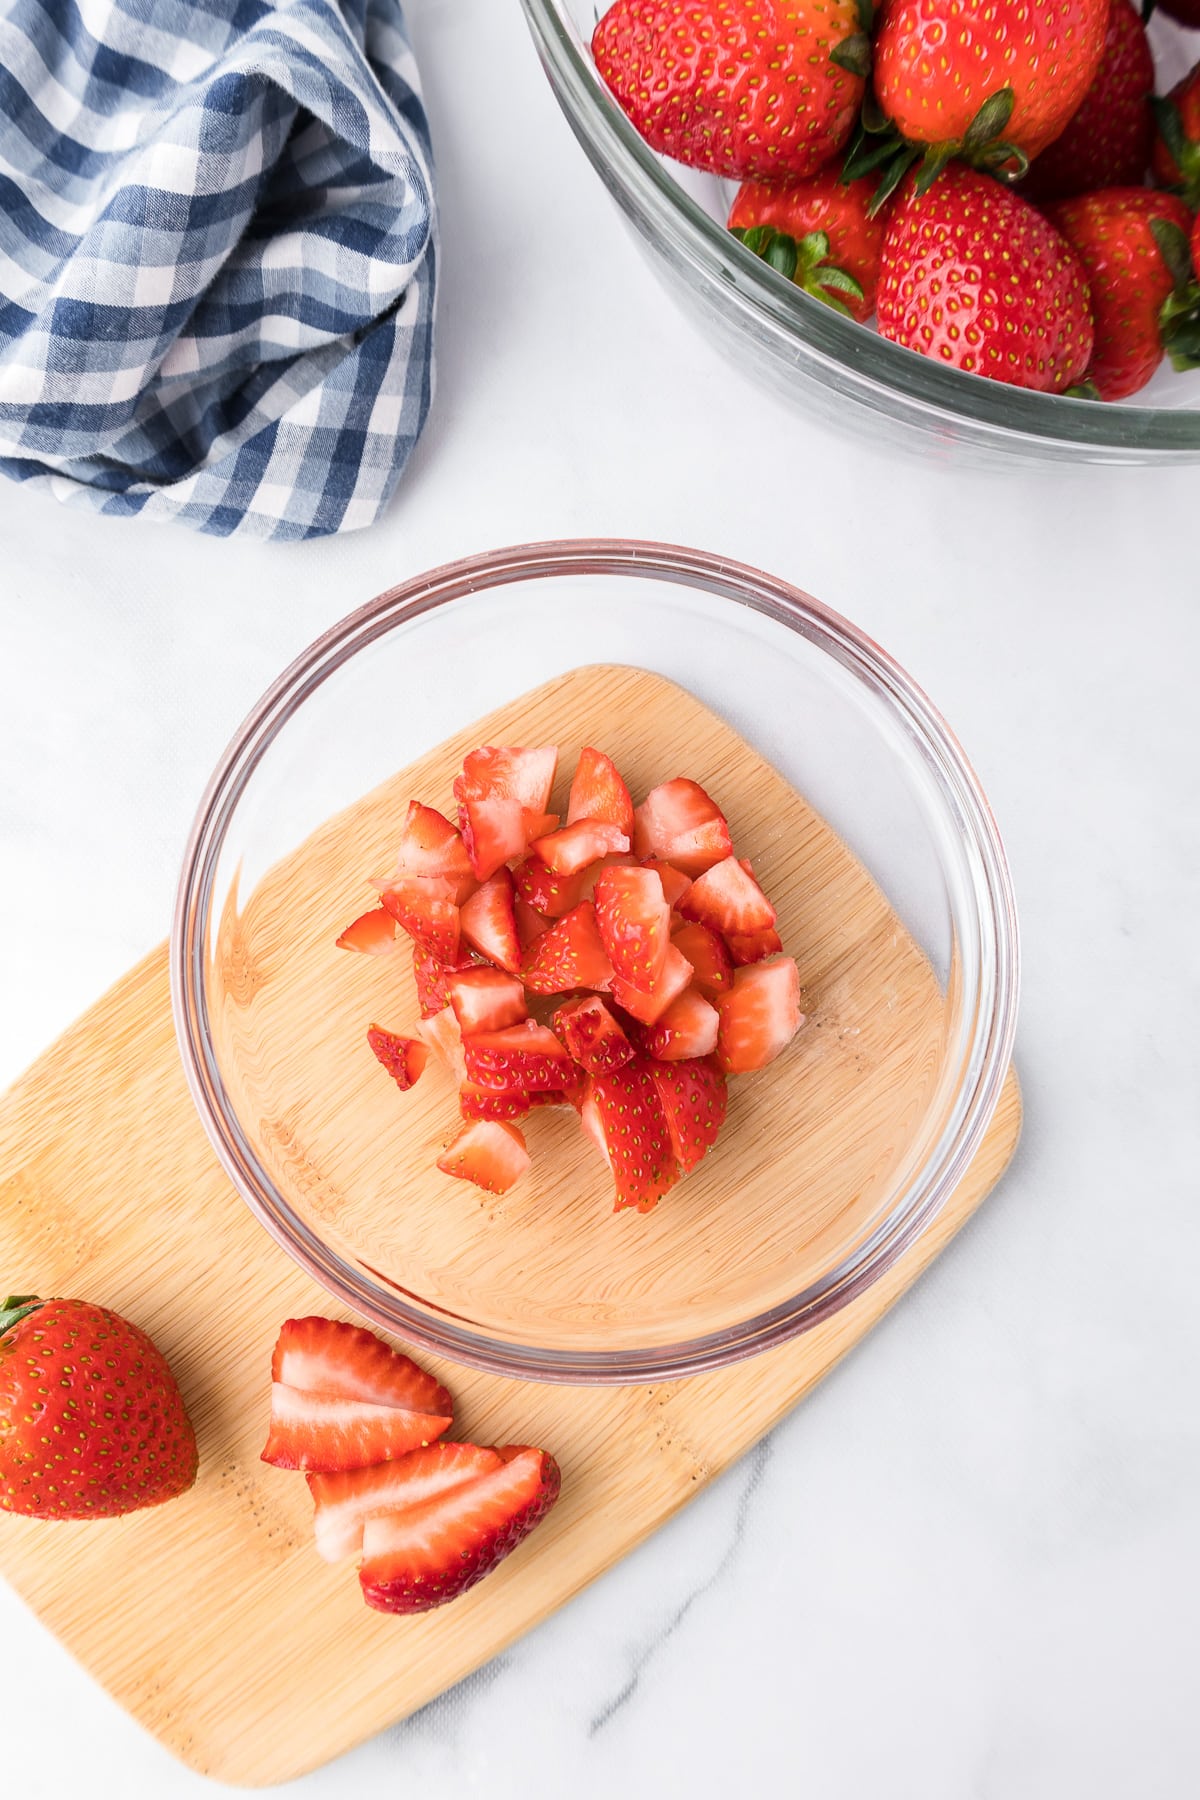 Strawberries being diced and placed in a bowl on a cutting board form overhead on a counter.